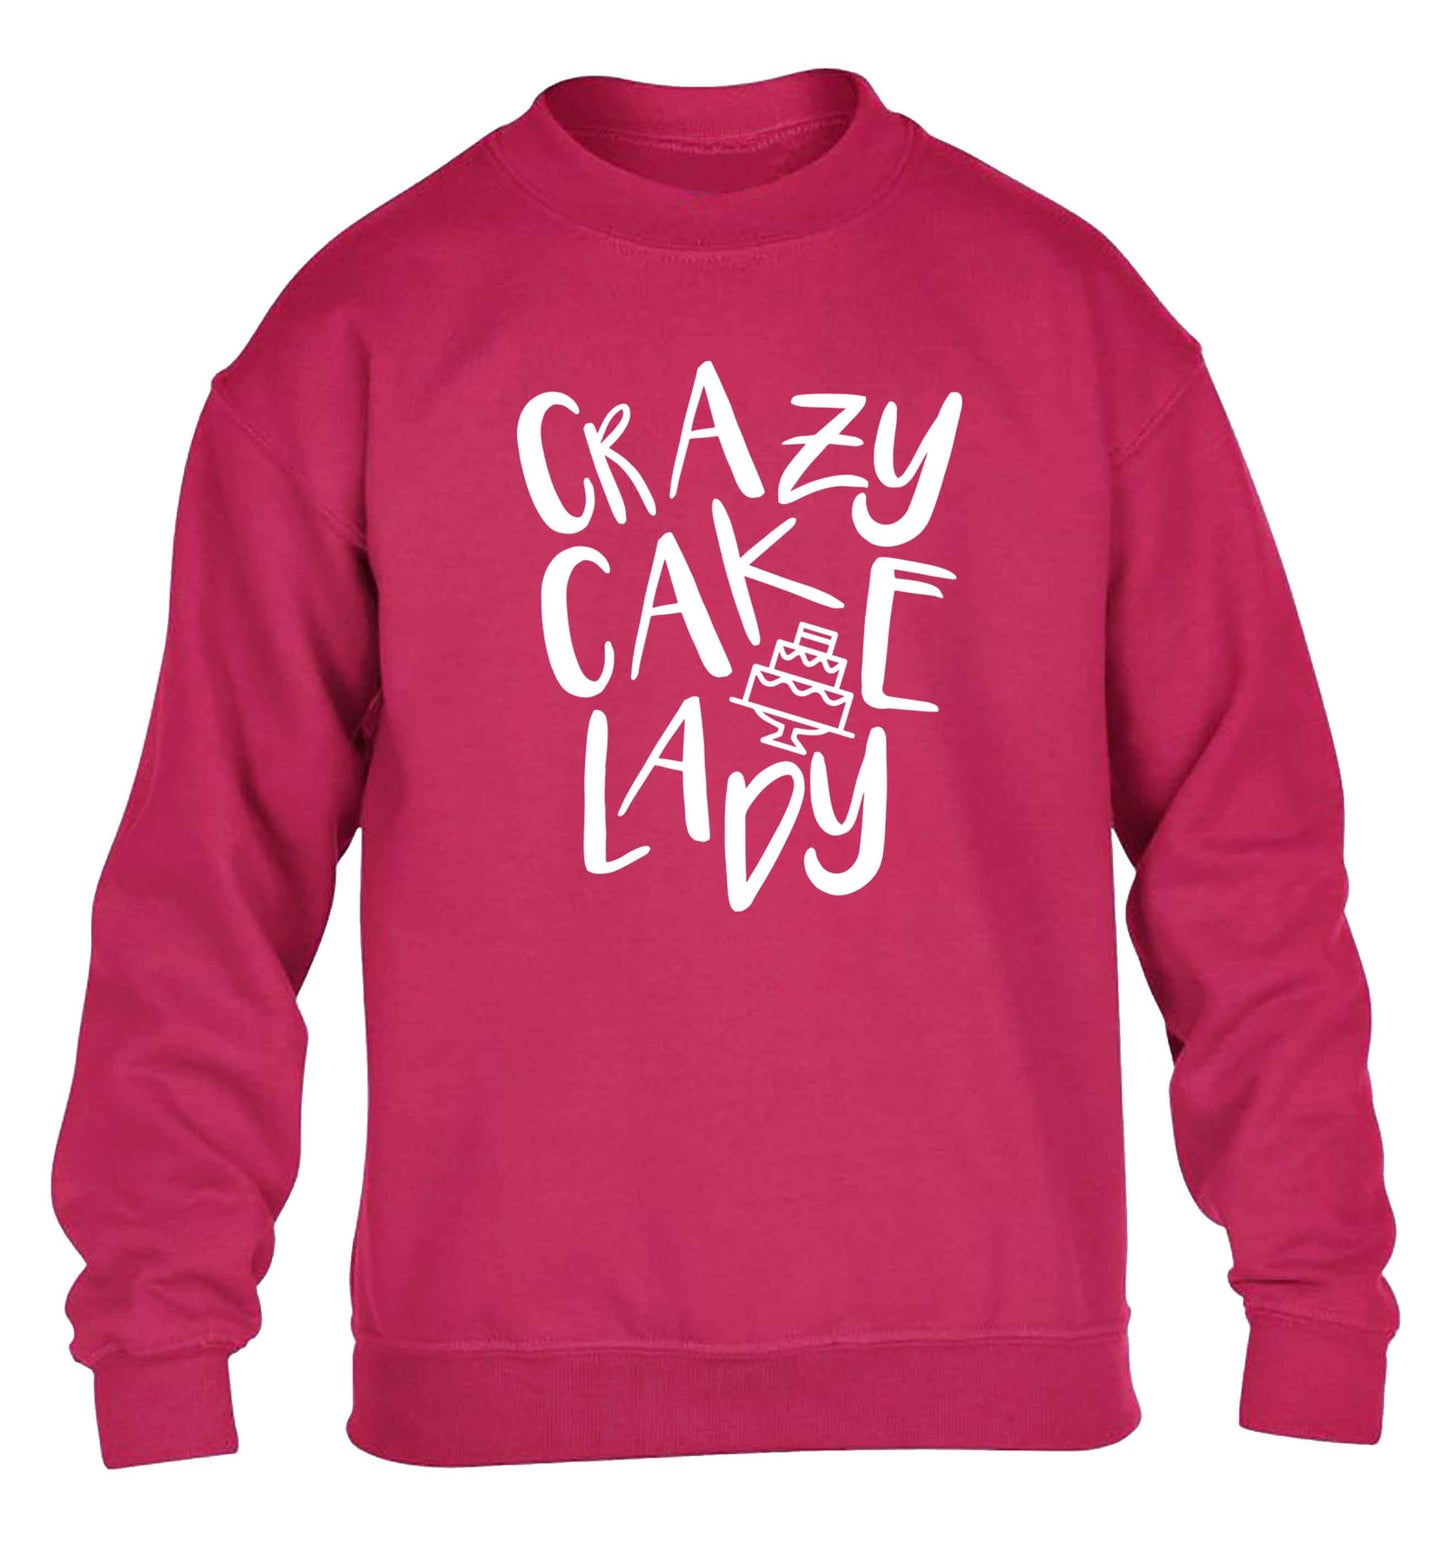 Crazy cake lady children's pink sweater 12-13 Years